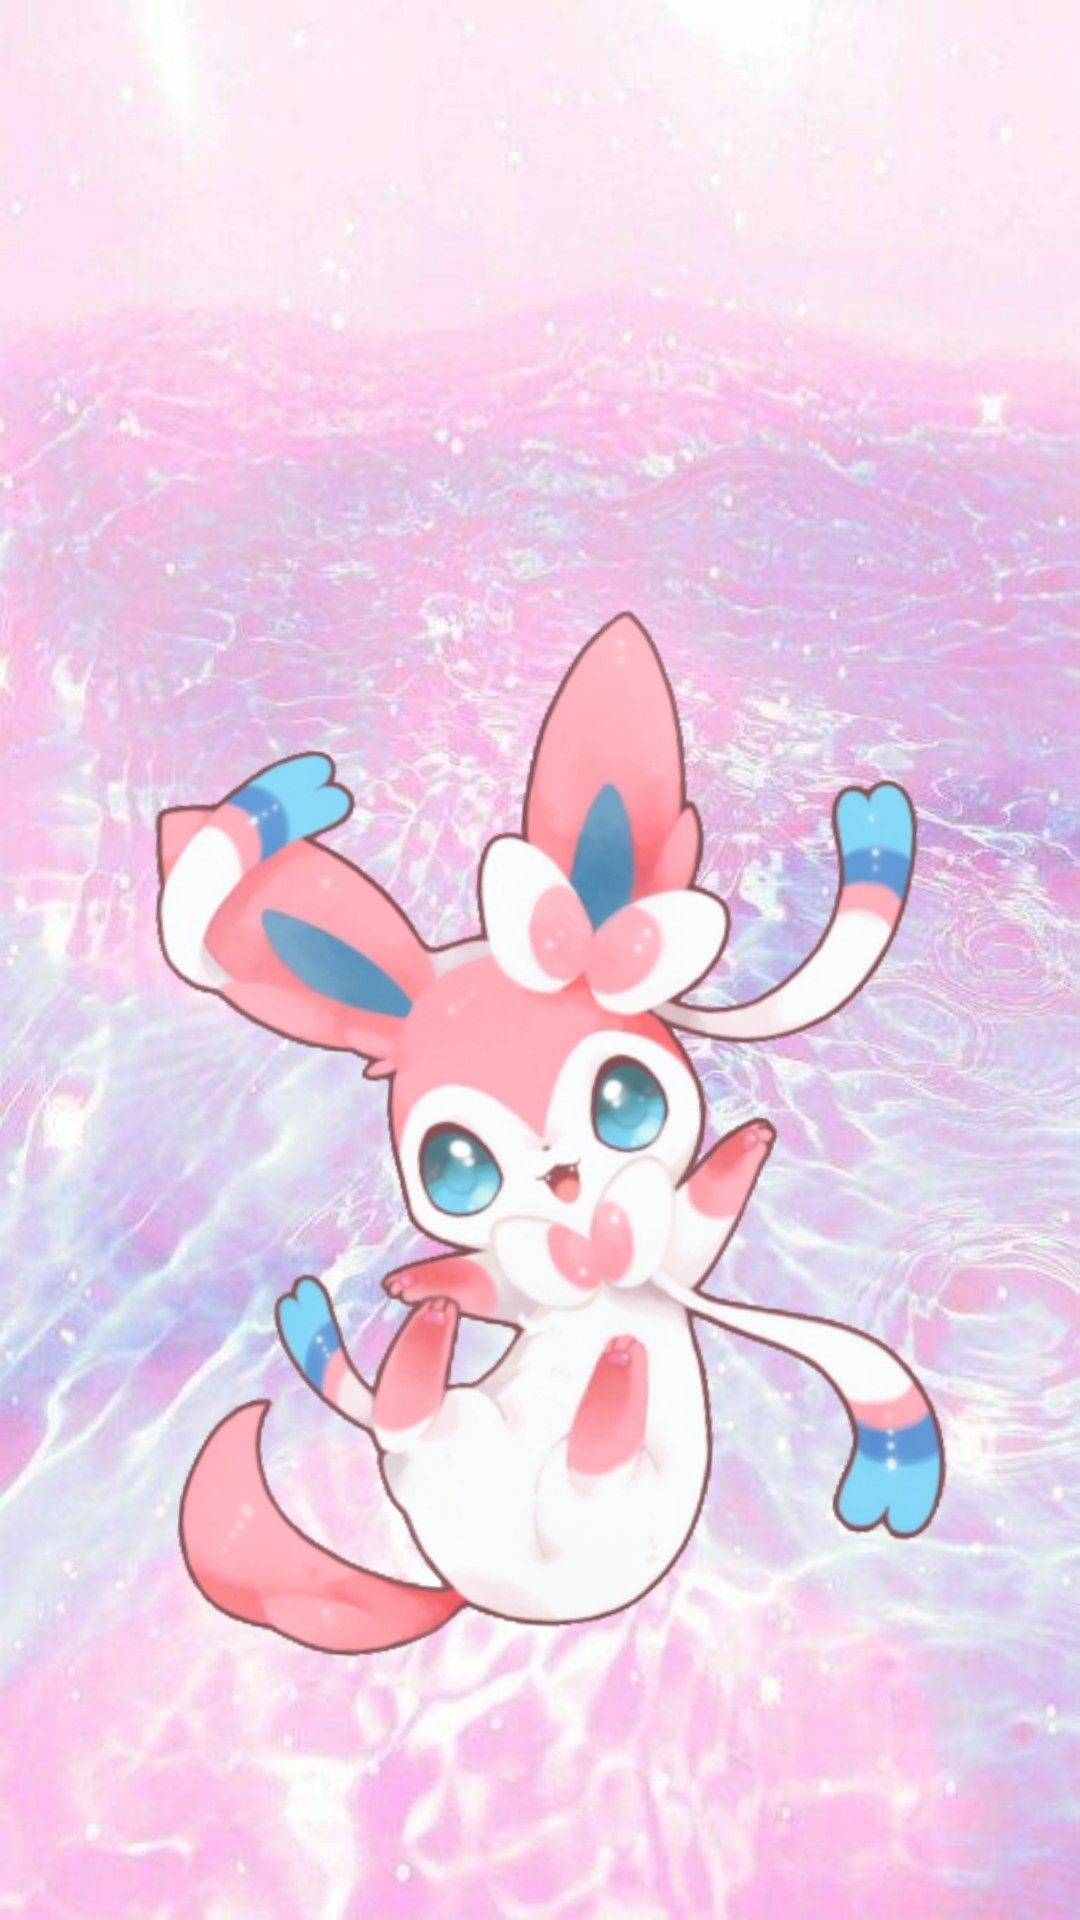 20 Sylveon Pokémon HD Wallpapers and Backgrounds